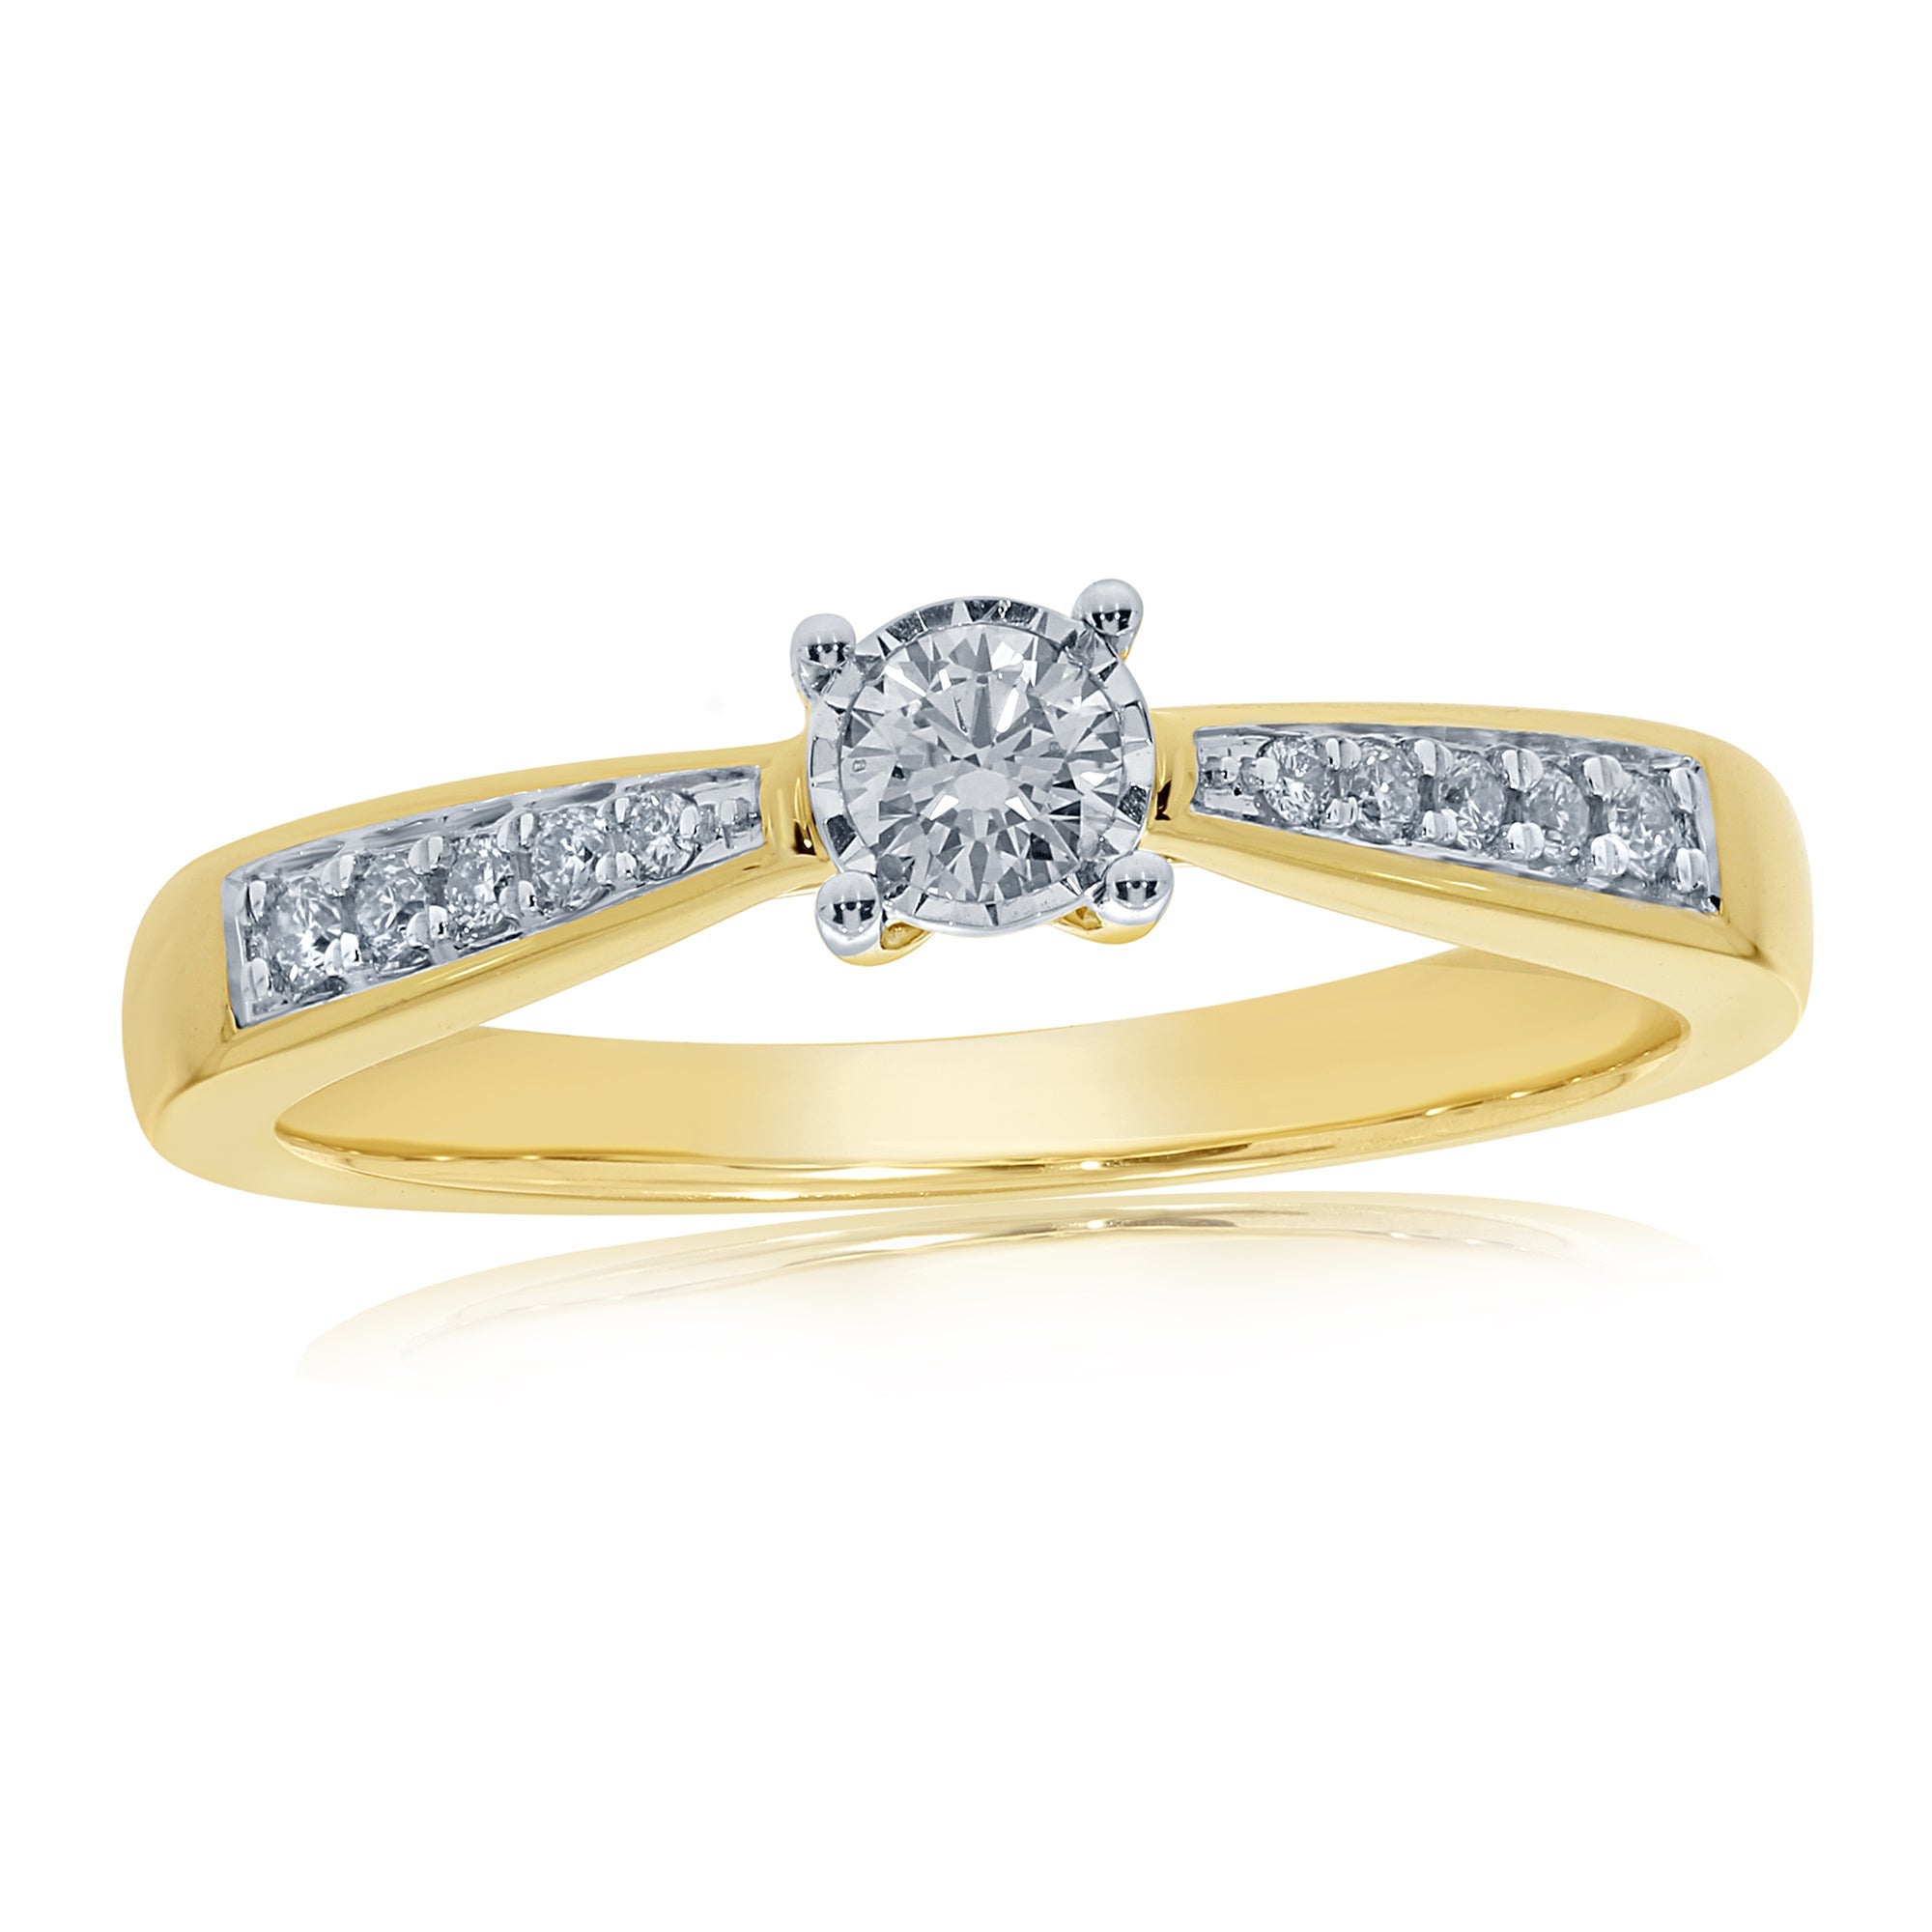 9ct gold single stone miracle plate diamond ring with diamond set shoulders 0.19ct